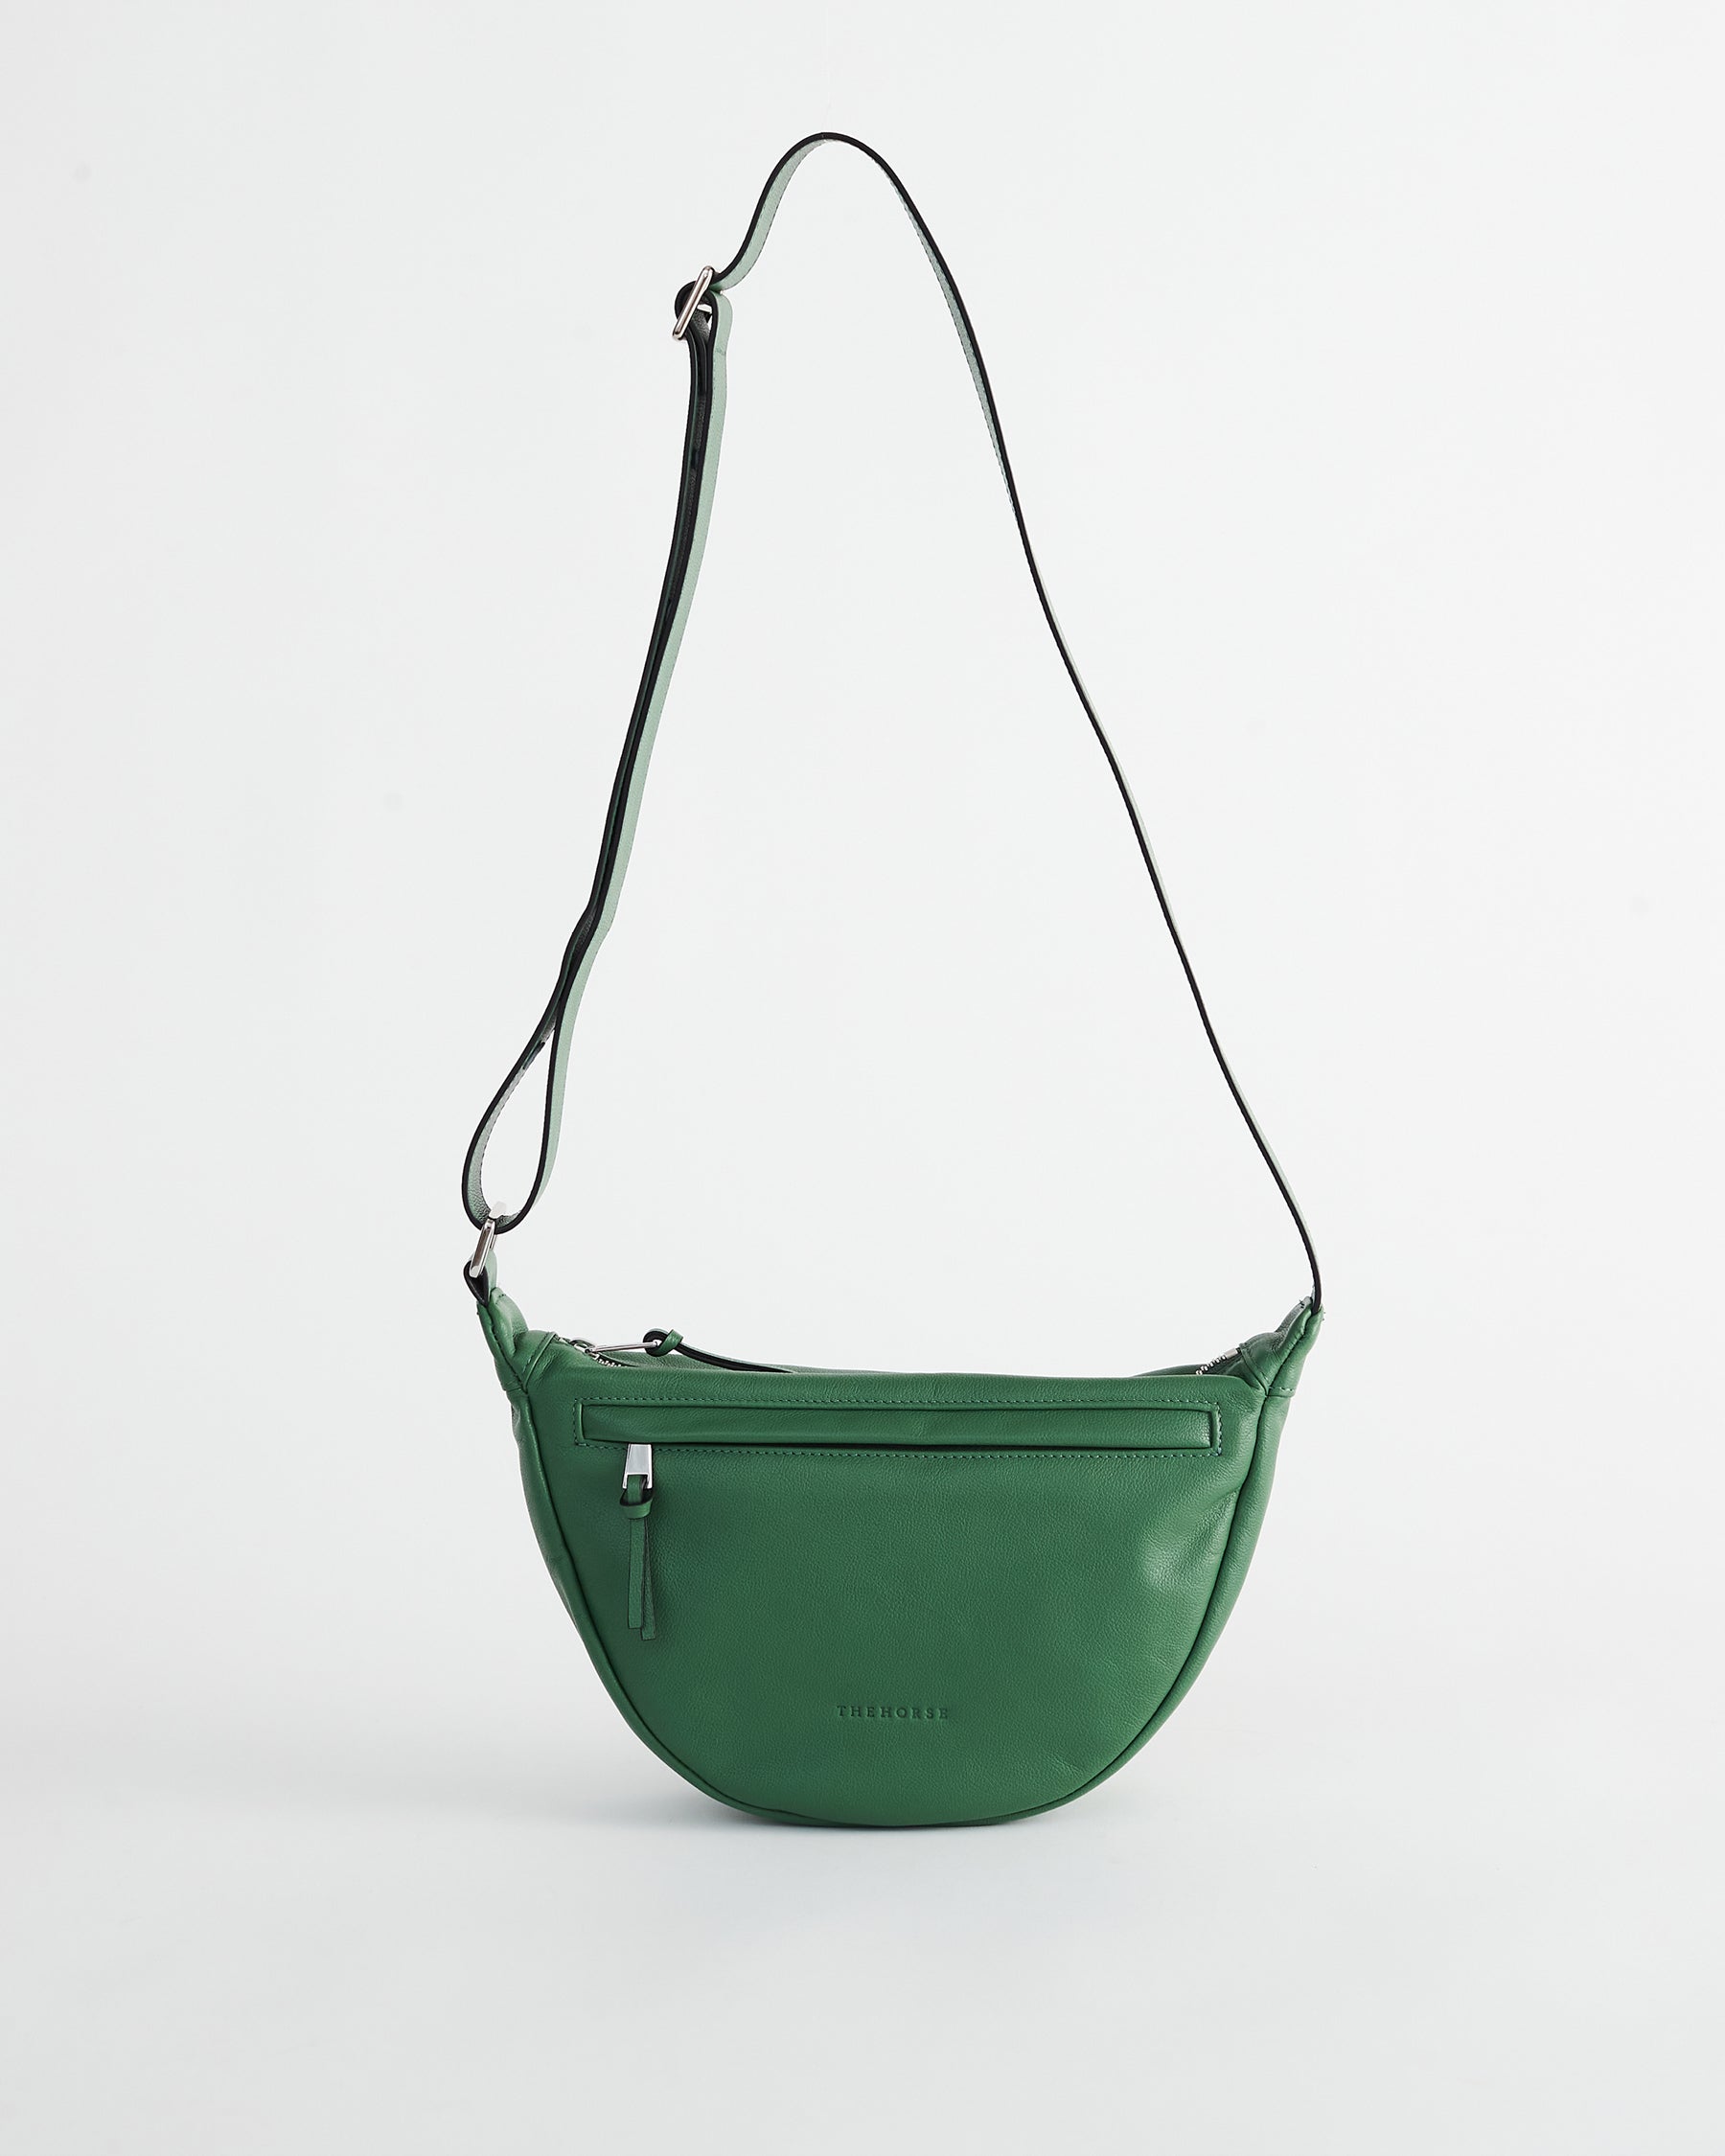 The Leather Sporty Crossbody Bag in Forest by The Horse®